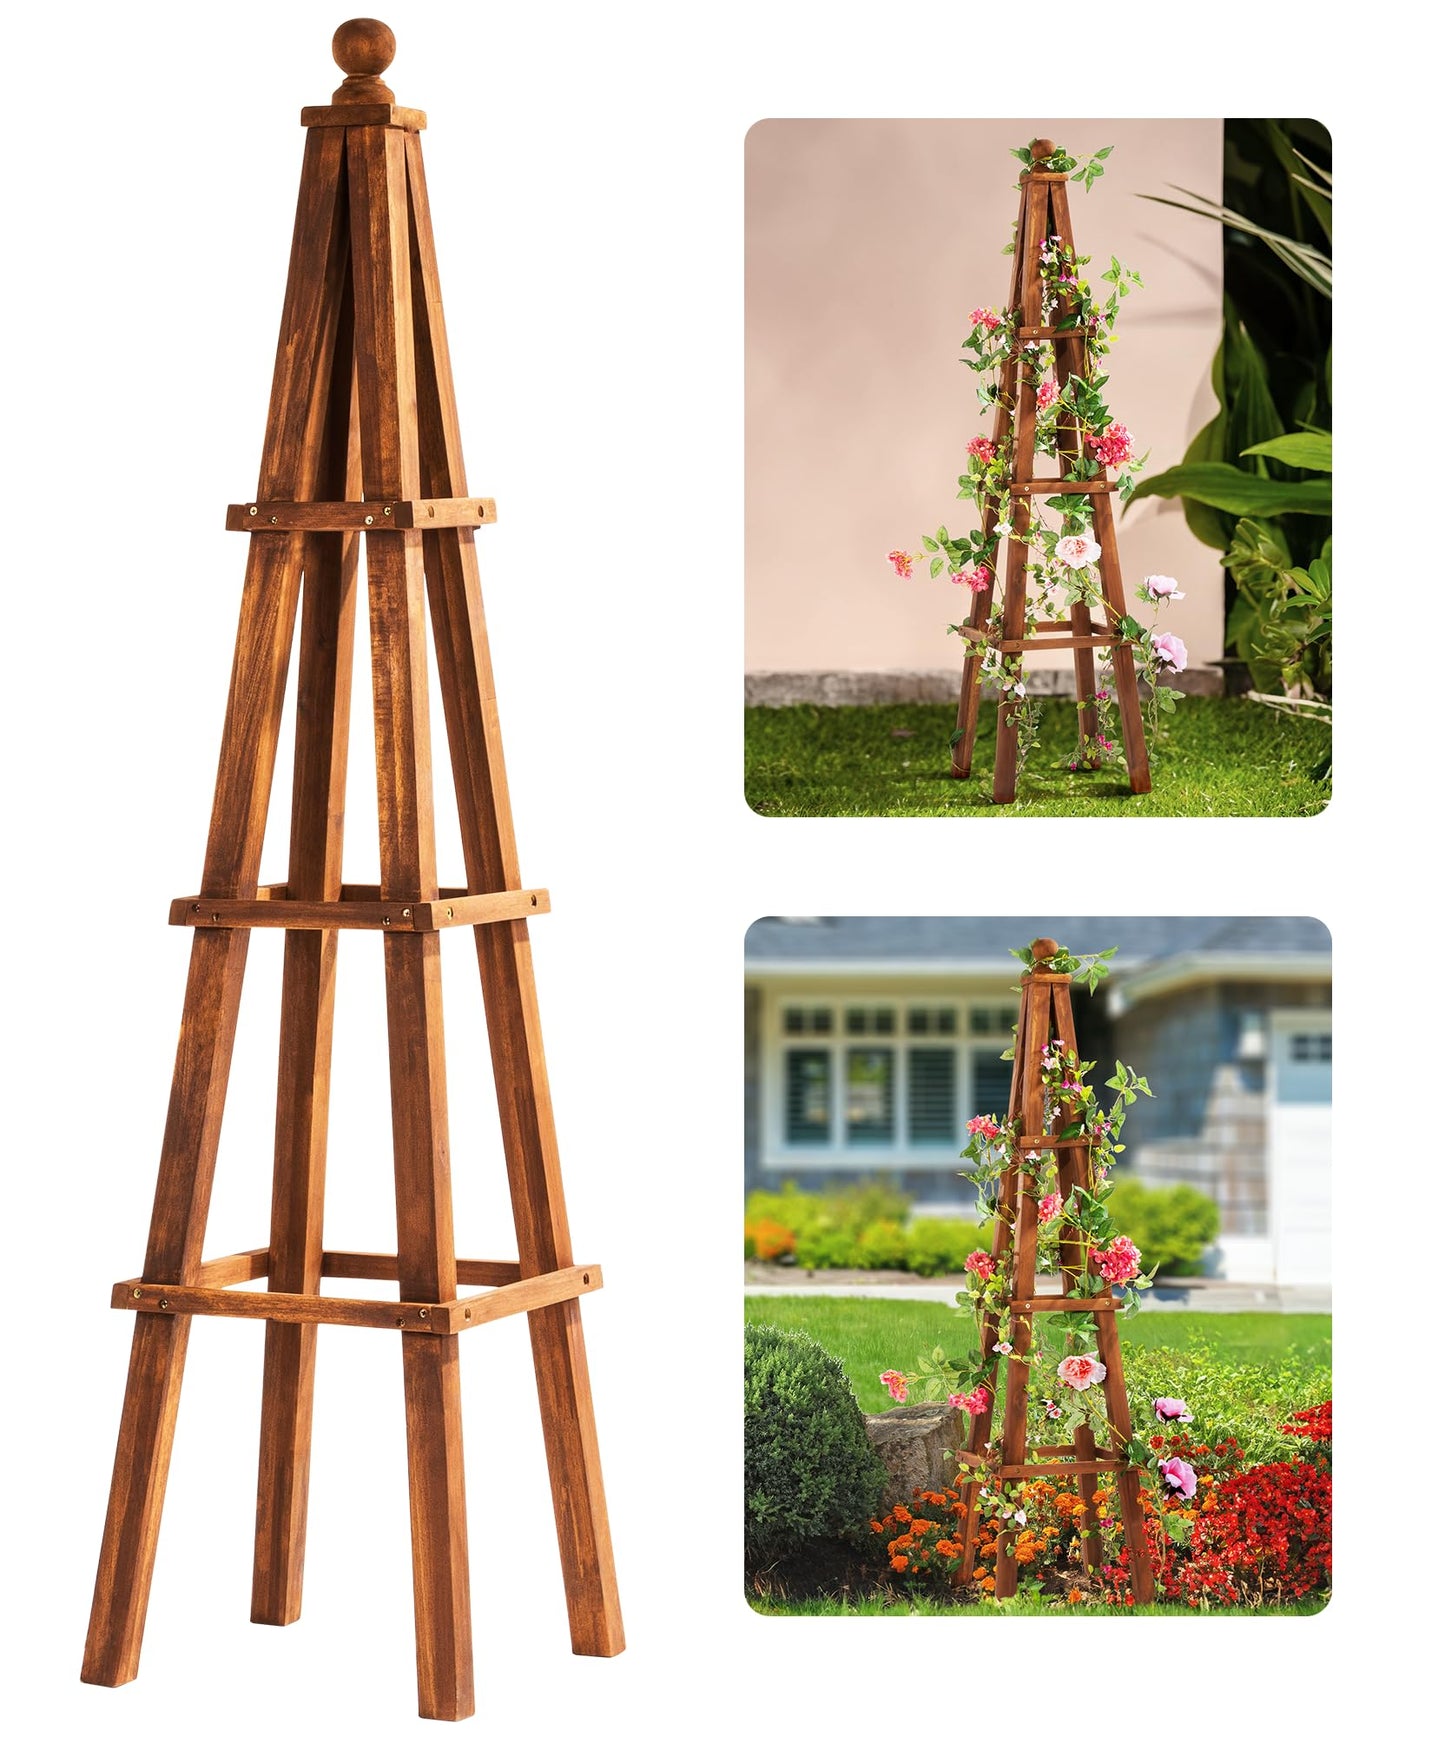 Idzo Acacia Wooden Obelisk Trellises for Climbing Plants Outdoor, 61 Inch Durable Obelisk Garden Trellises with UV Protective Finish, Stylish Climbing Plant Support for Porch, Balcony, Easy Assembly